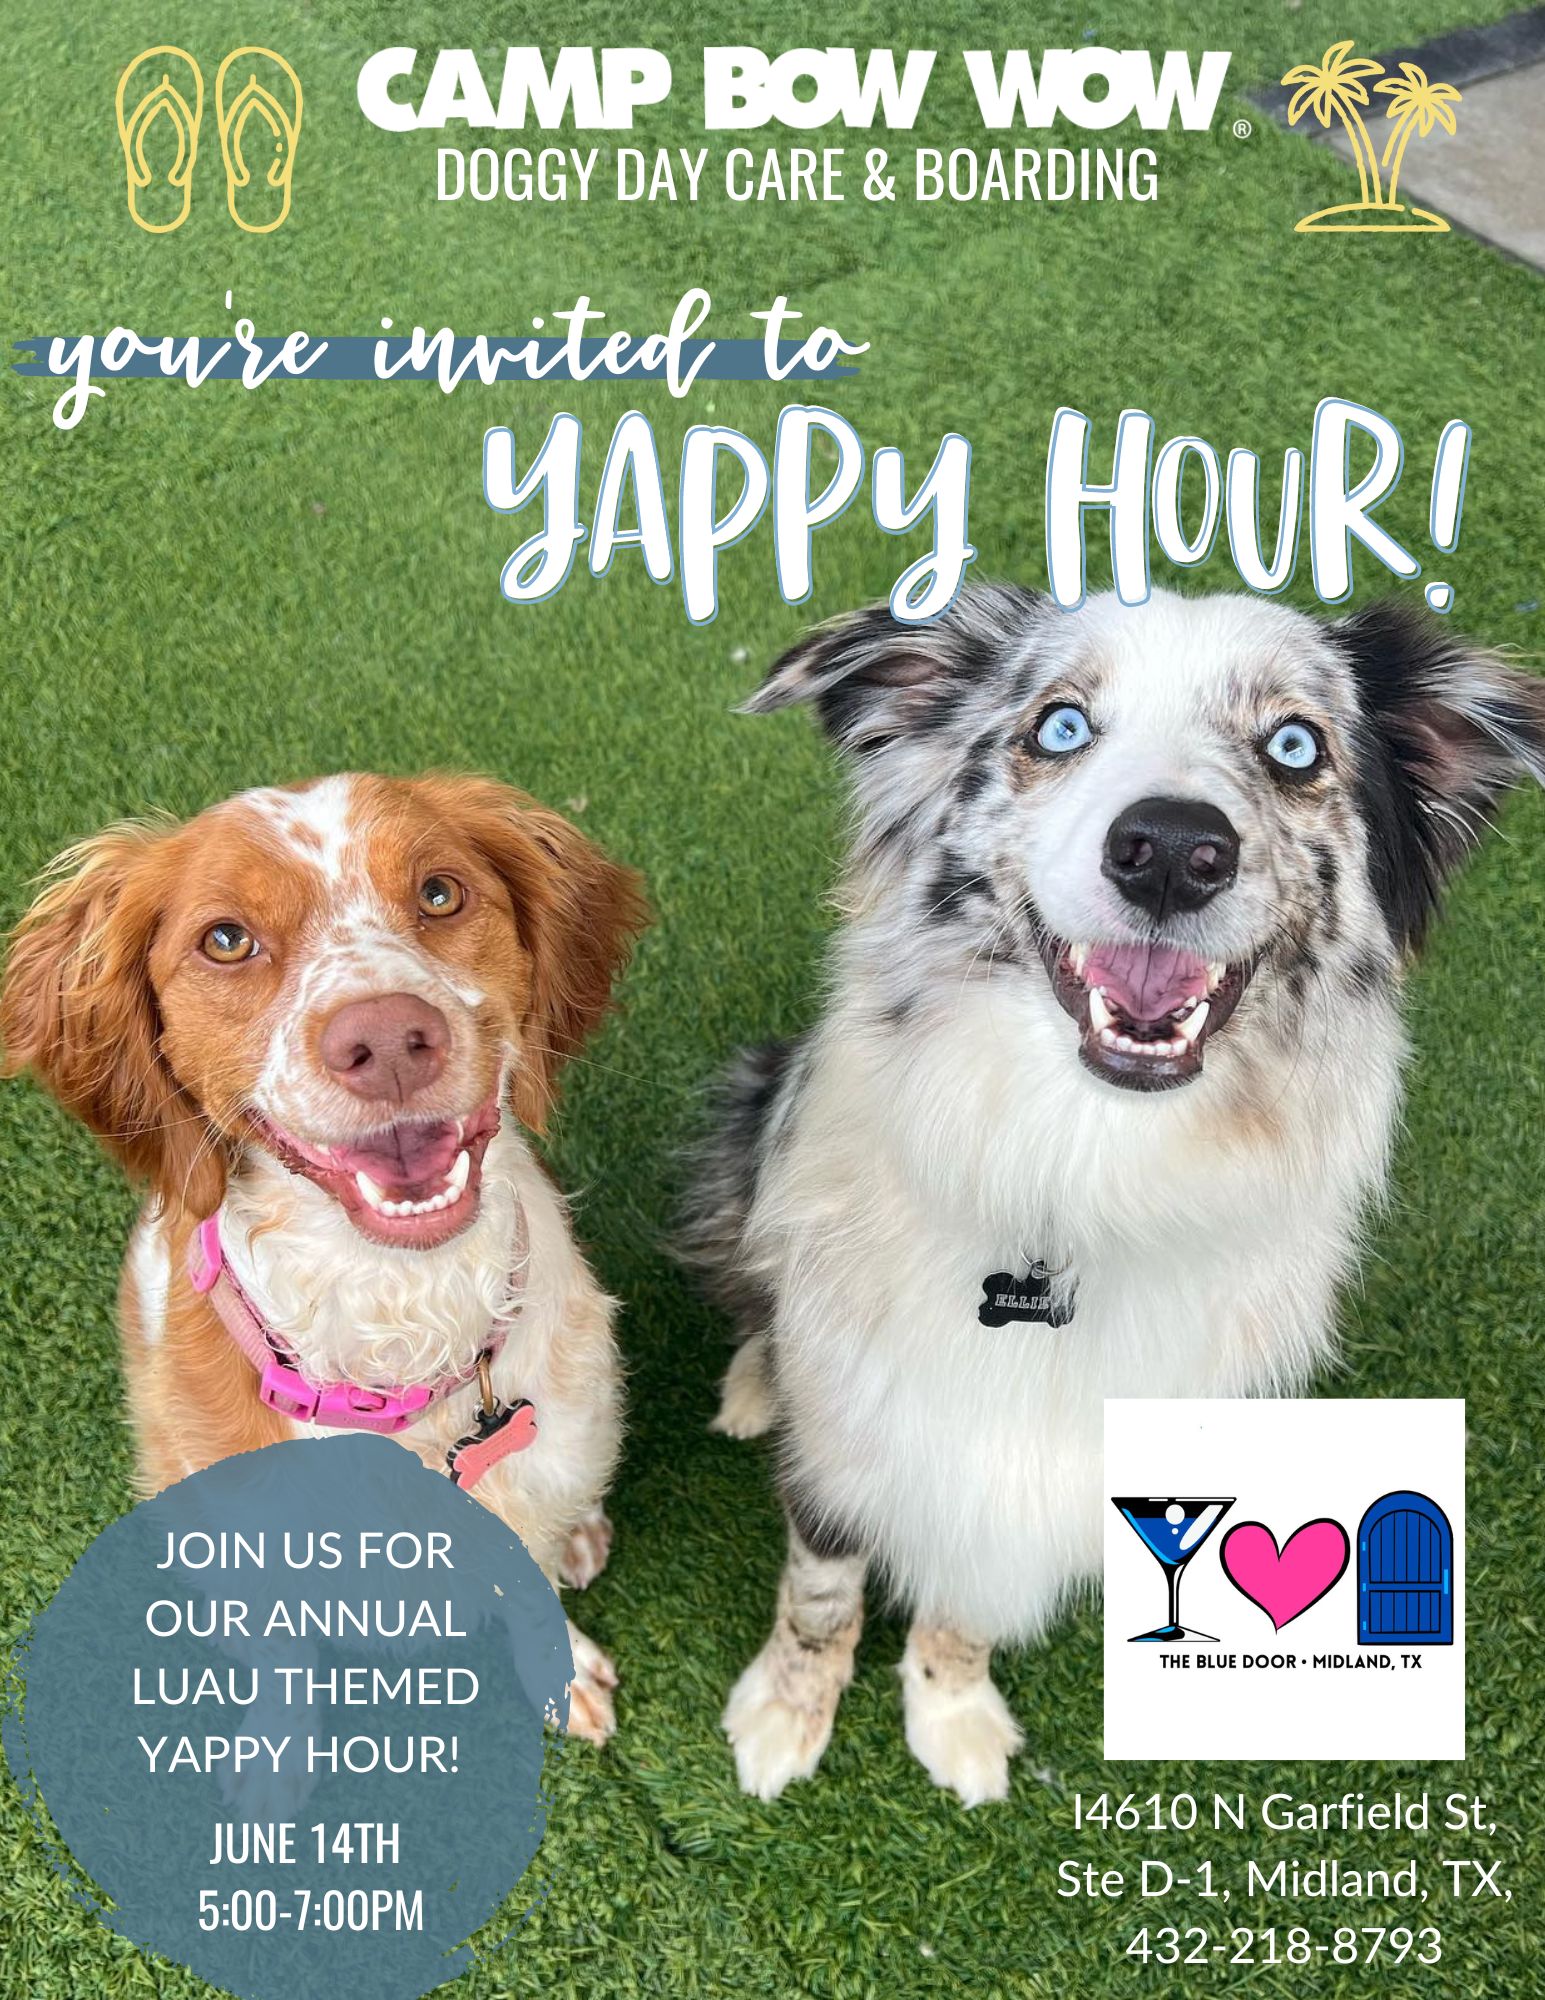 Yappy Hour Event June 14th from 5pm-7pm